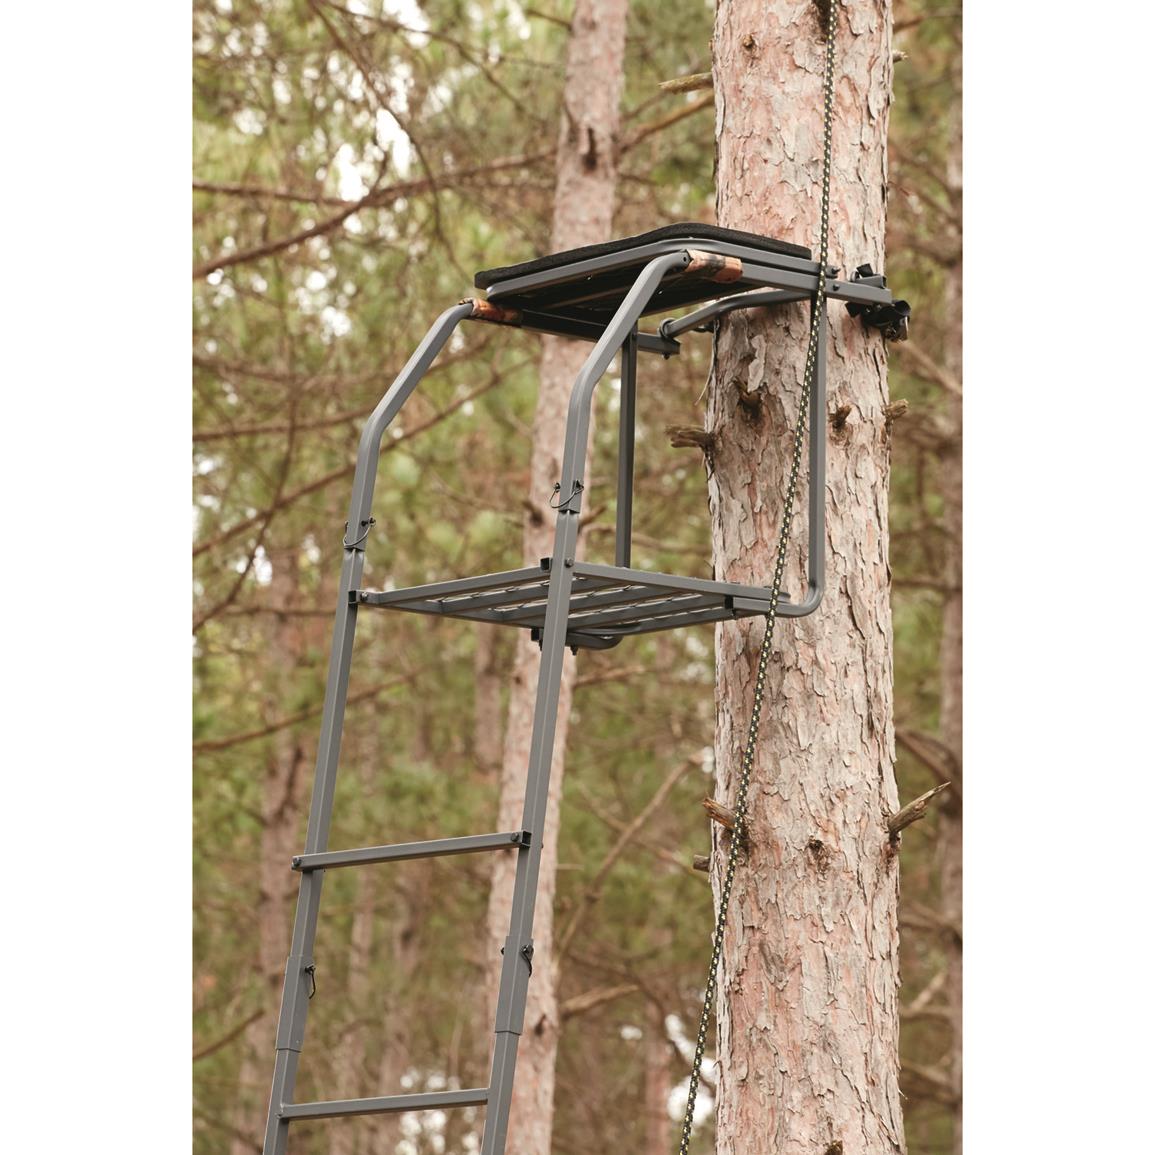 Guide Gear 18 Jumbo Ladder Tree Stand 177432 Ladder Tree Stands At Sportsman S Guide